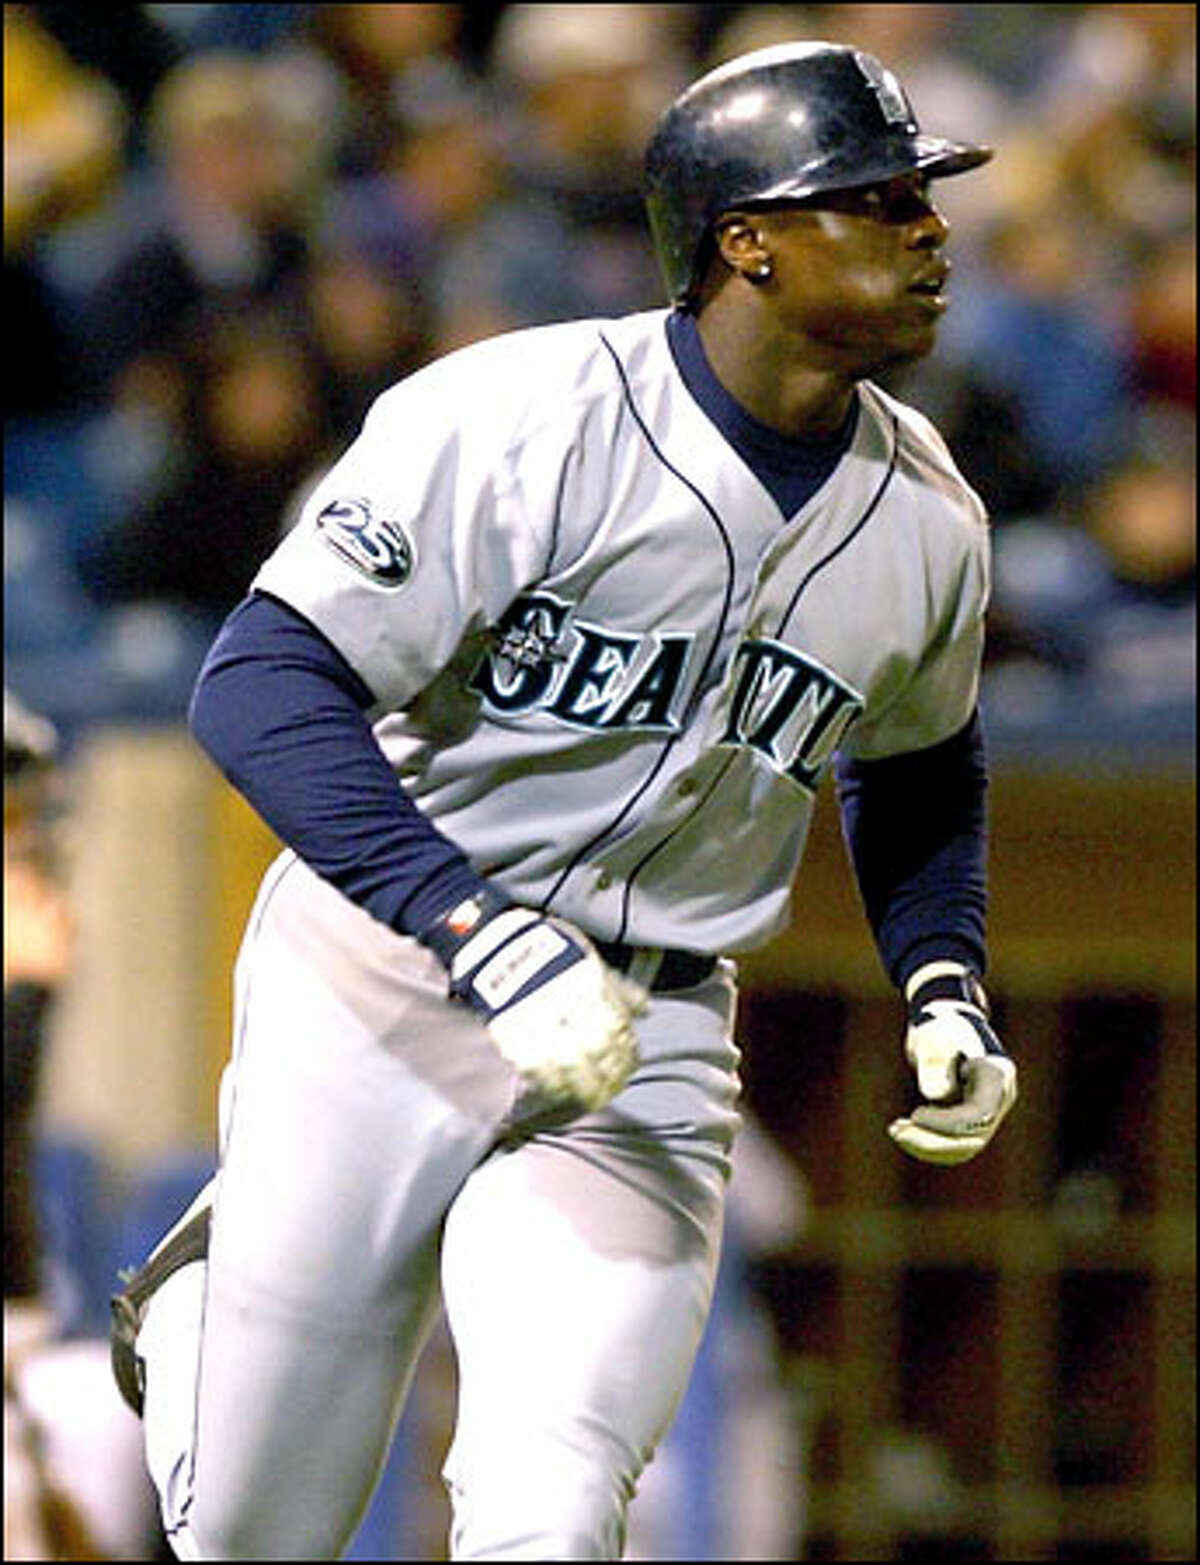 Seattle Mariners' Mike Cameron rounds the bases on his fourth home run of the game, in the fifth inning against the Chicago White Sox on Thursday, May 2, 2002, in Chicago. Cameron became only the 13th player in major league history to homer four times in a game. Seattle won 15-4.